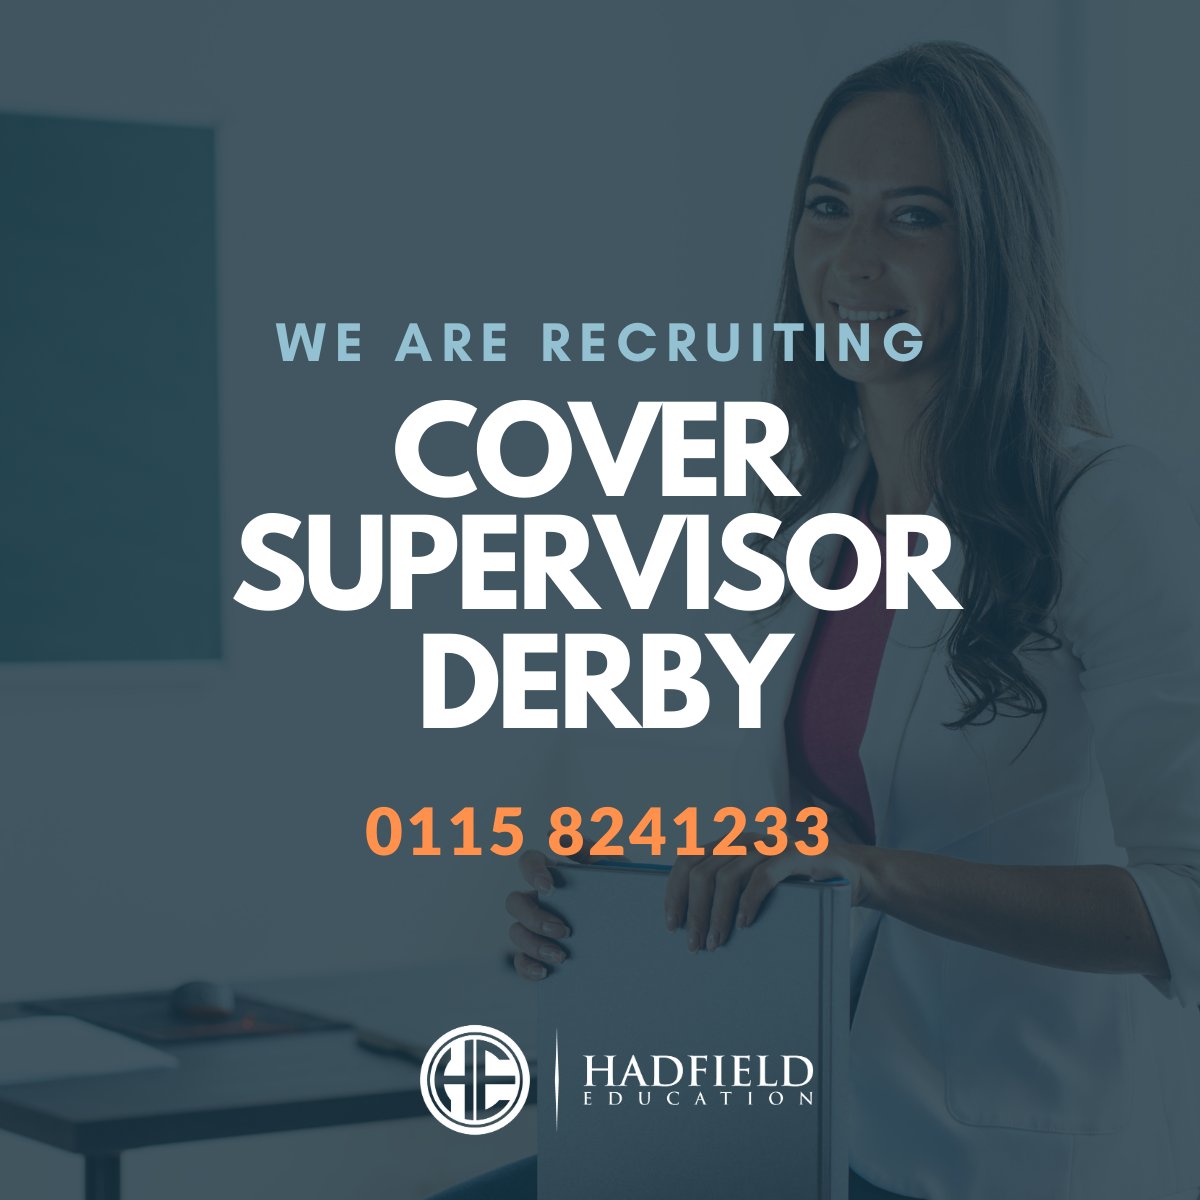 📢 Exciting opportunity! 📢 Become a Cover Supervisor in 📍Derby 🎓 Join our team and make a difference! 💼 #DerbyJobs #TeachingJobs #CoverSupervisorJobs 🚀 bit.ly/3OS5WYX